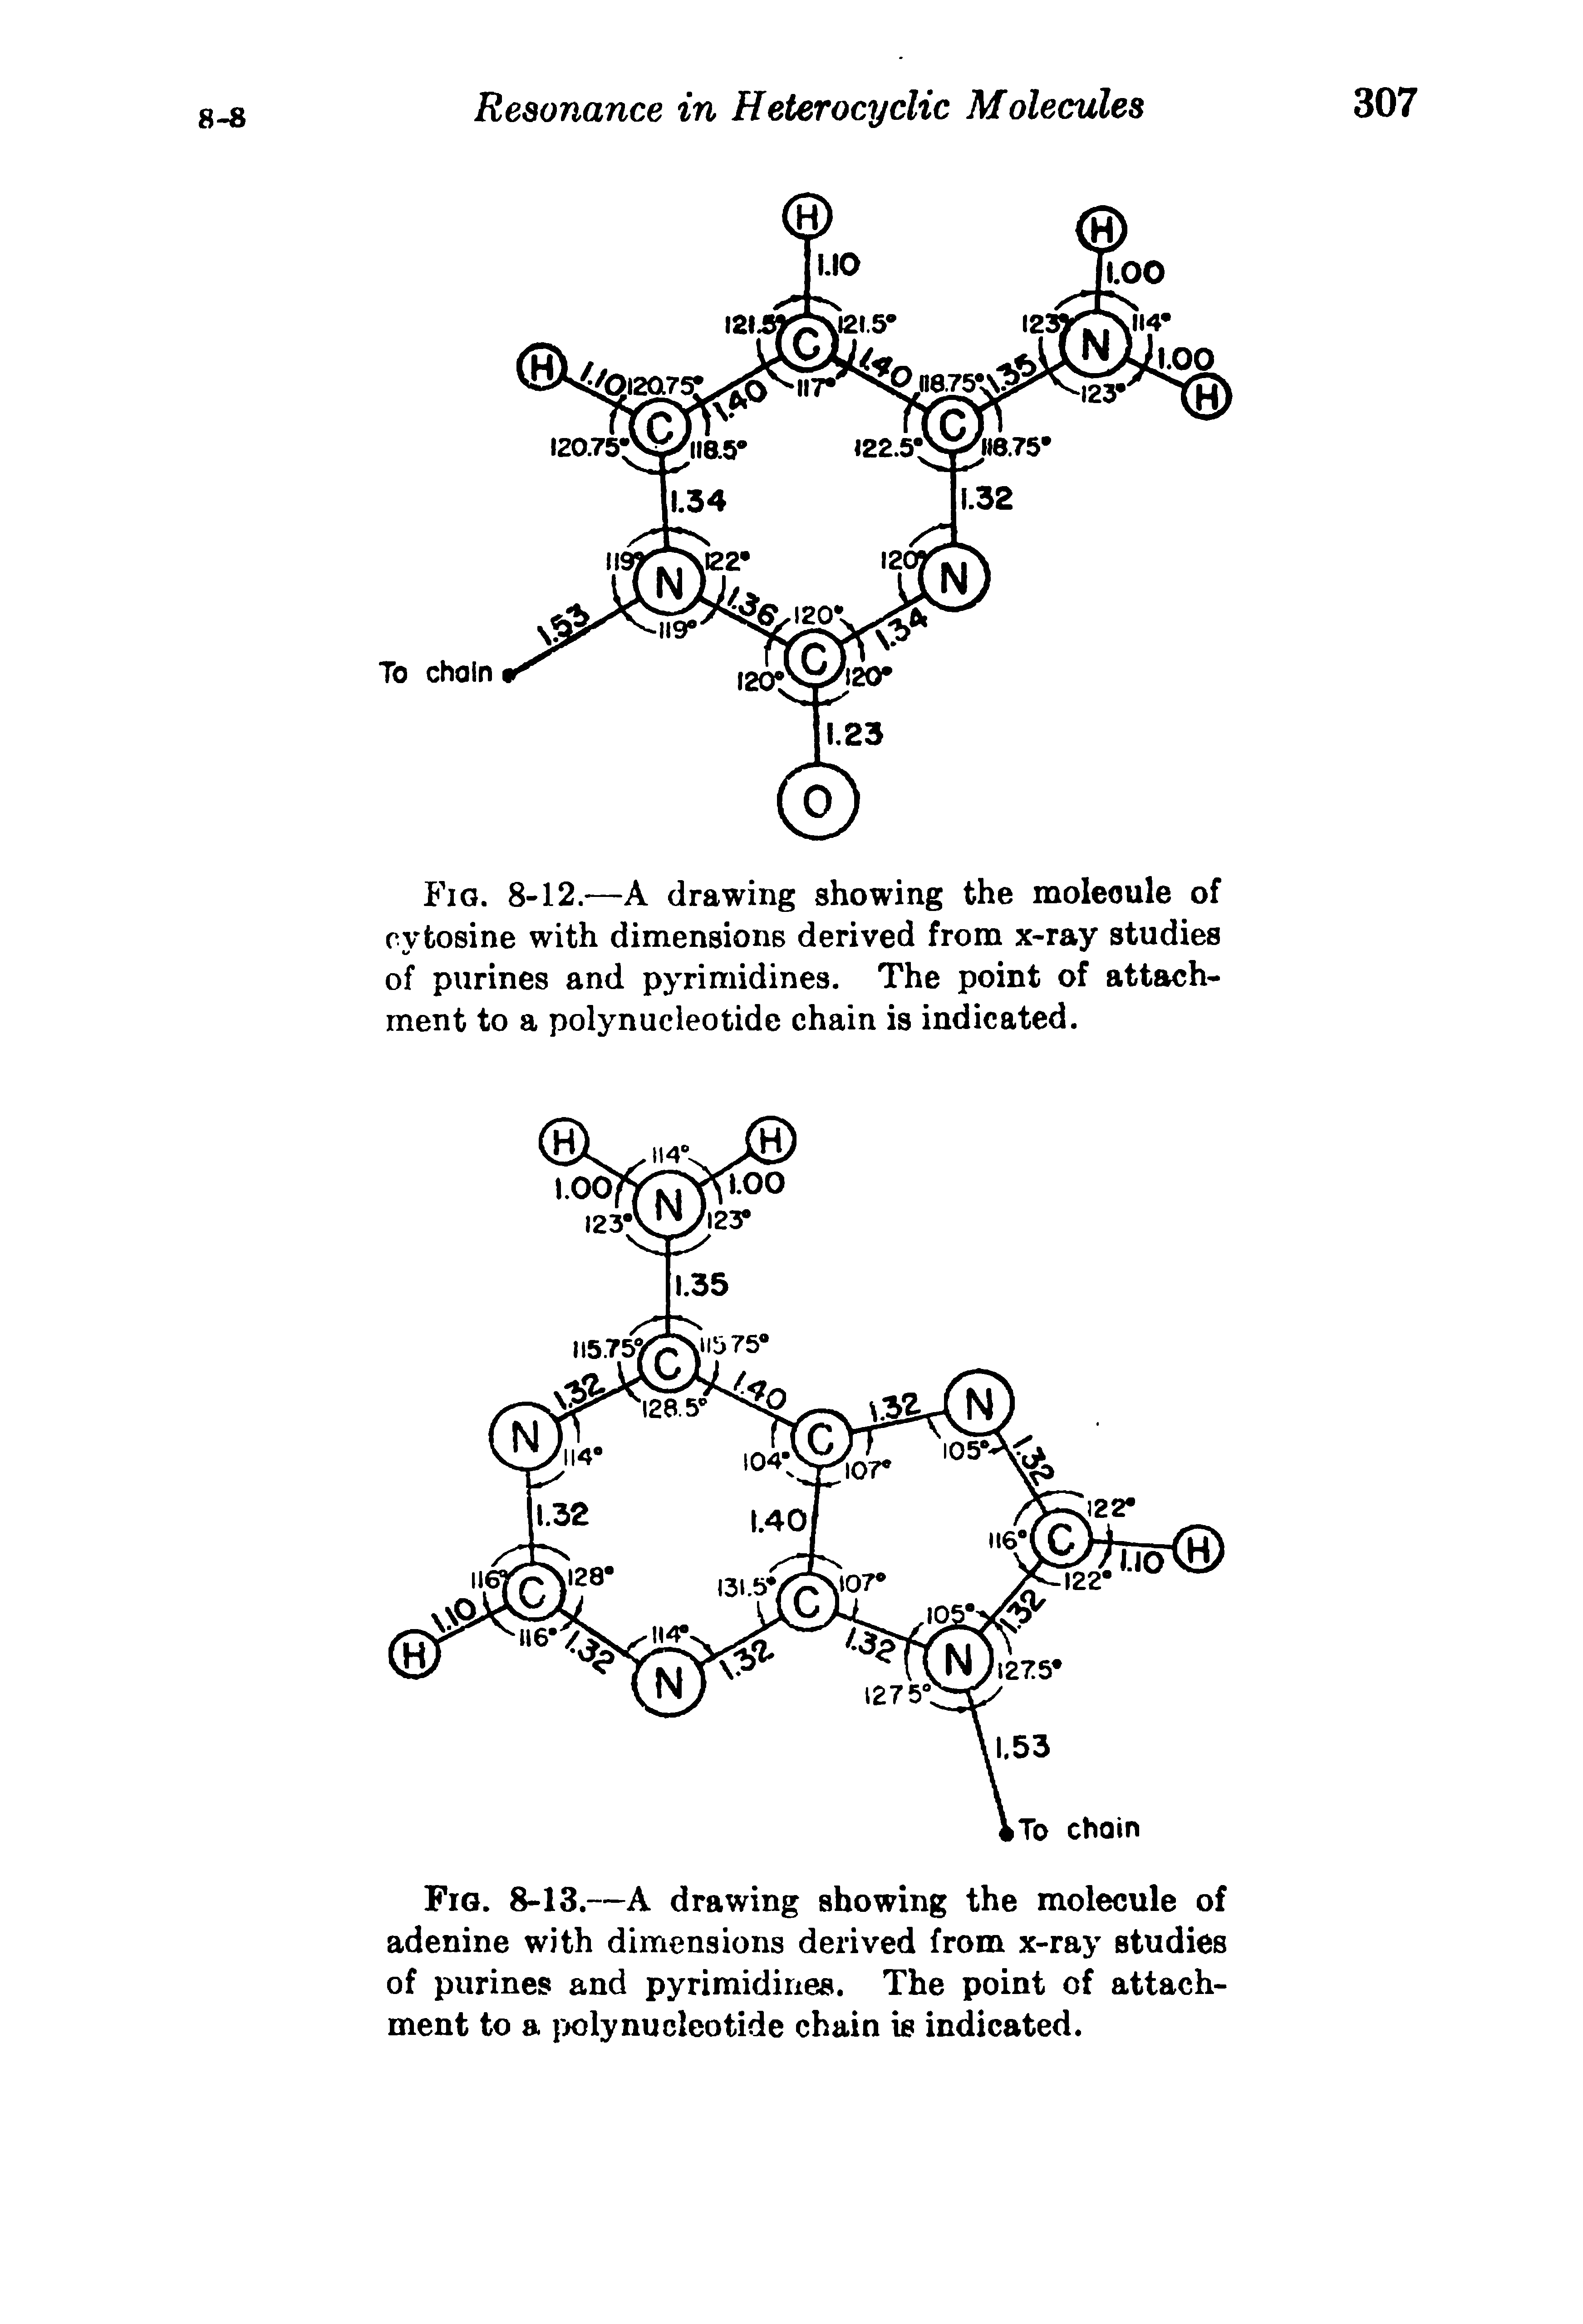 Fig. 8-13.—A drawing showing the molecule of adenine with dimensions derived from x-ray studies of purines and pyrimidines. The point of attachment to a poly nucleotide chain is indicated.